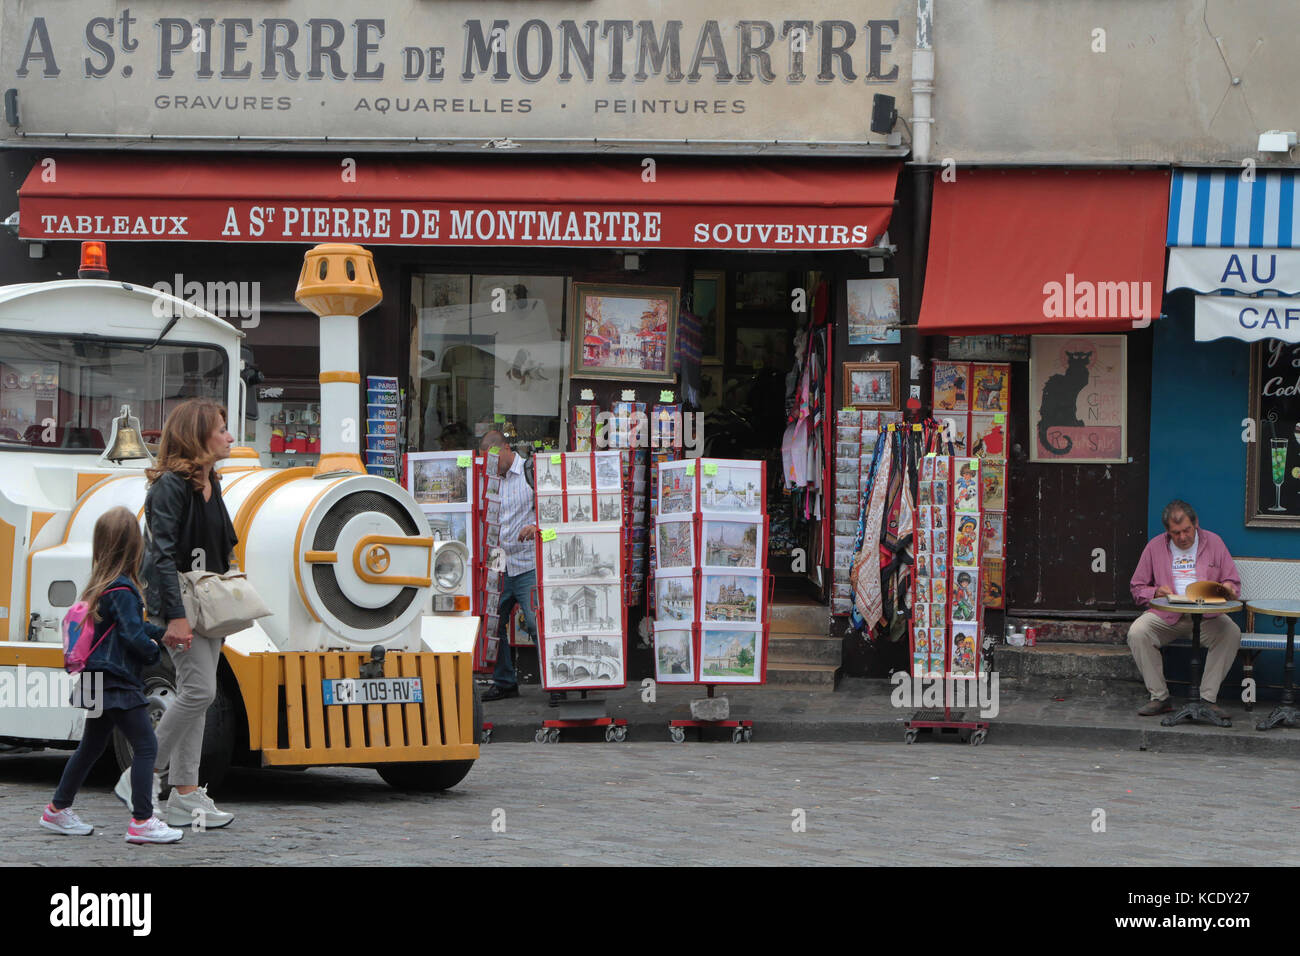 PARIS, FRANCE, SEPTEMBER 5, 2014 : Small train for tourists stops in front of souvenir stores. Montmartre is one of the most touristic district in Par Stock Photo